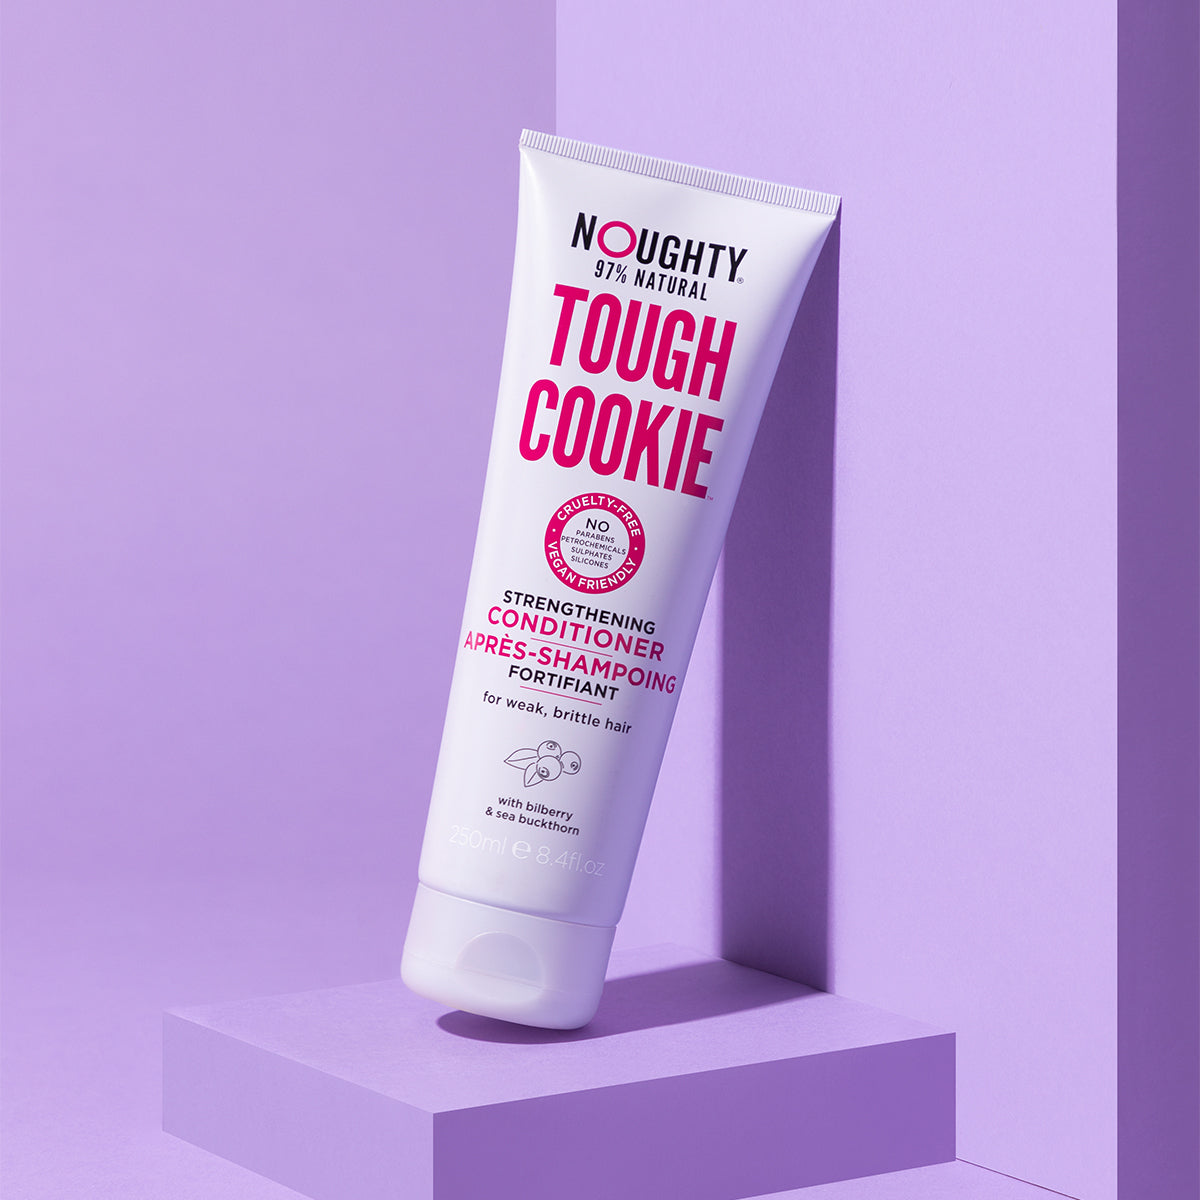 Noughty Tough Cookie strengthening conditioner for weak, brittle and damaged hair. Natural haircare vegan cruelty free natural sulphate free paraben free 